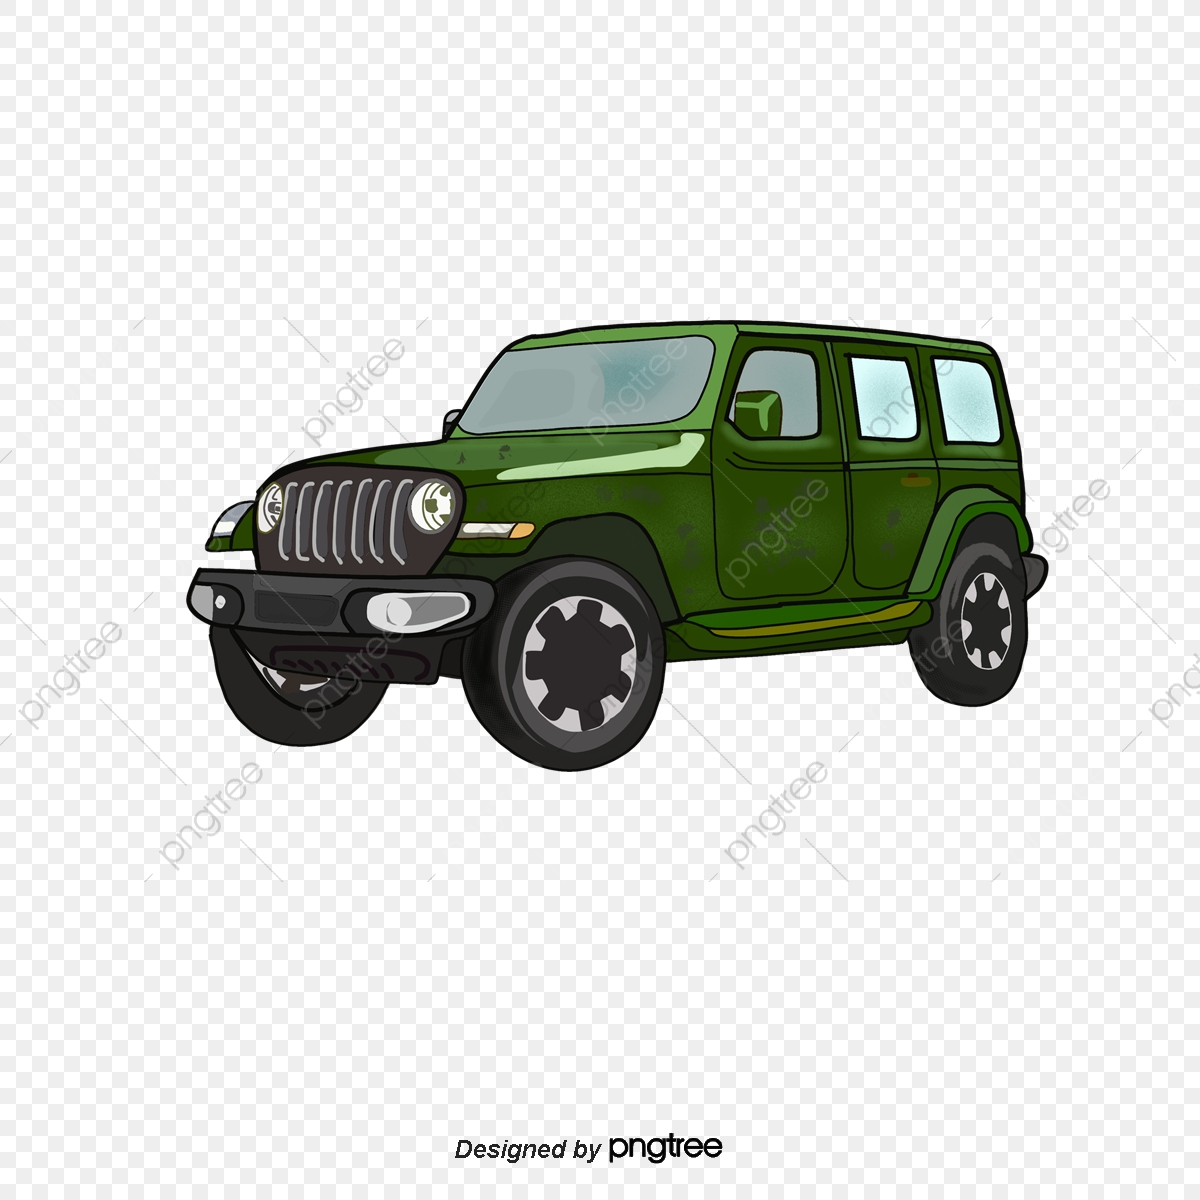 jeep clipart hand